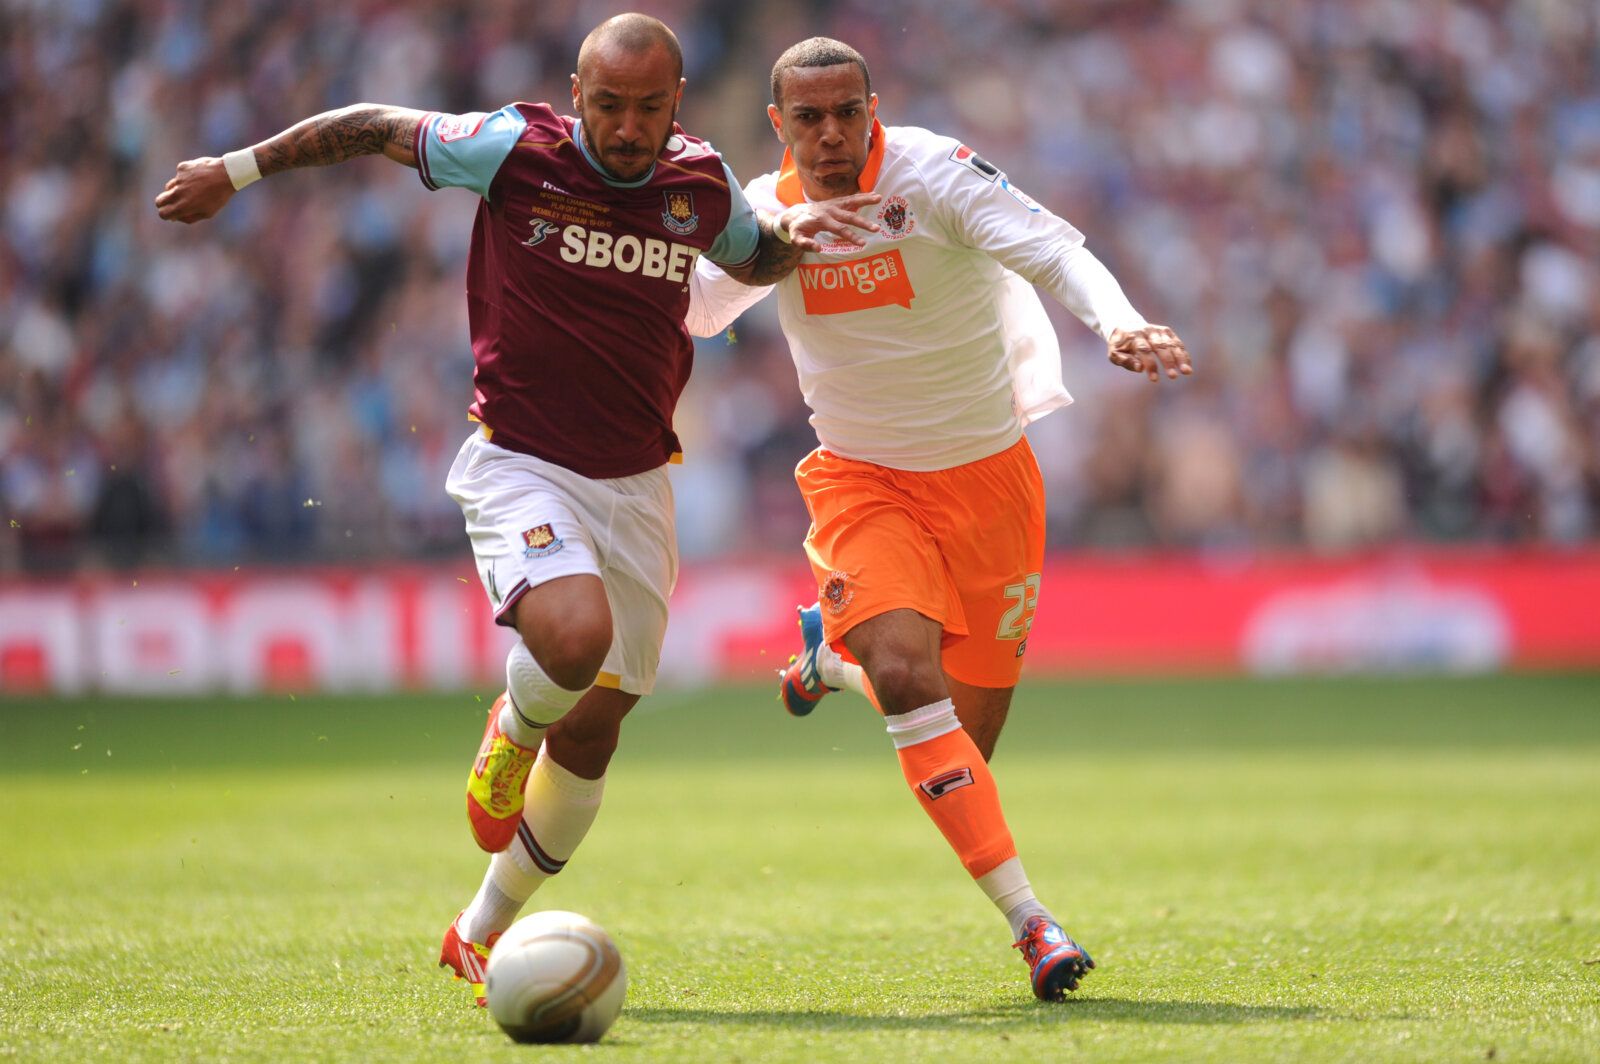 Football - Blackpool v West Ham United - npower Football League Championship Play-Off Final - Wembley Stadium - 11/12 - 19/5/12 
West Ham United's Julien Faubert in action against Blackpool's Matthew Phillips 
Mandatory Credit: Action Images / Alex Morton 
EDITORIAL USE ONLY. No use with unauthorized audio, video, data, fixture lists, club/league logos or live services. Online in-match use limited to 45 images, no video emulation. No use in betting, games or single club/league/player publication